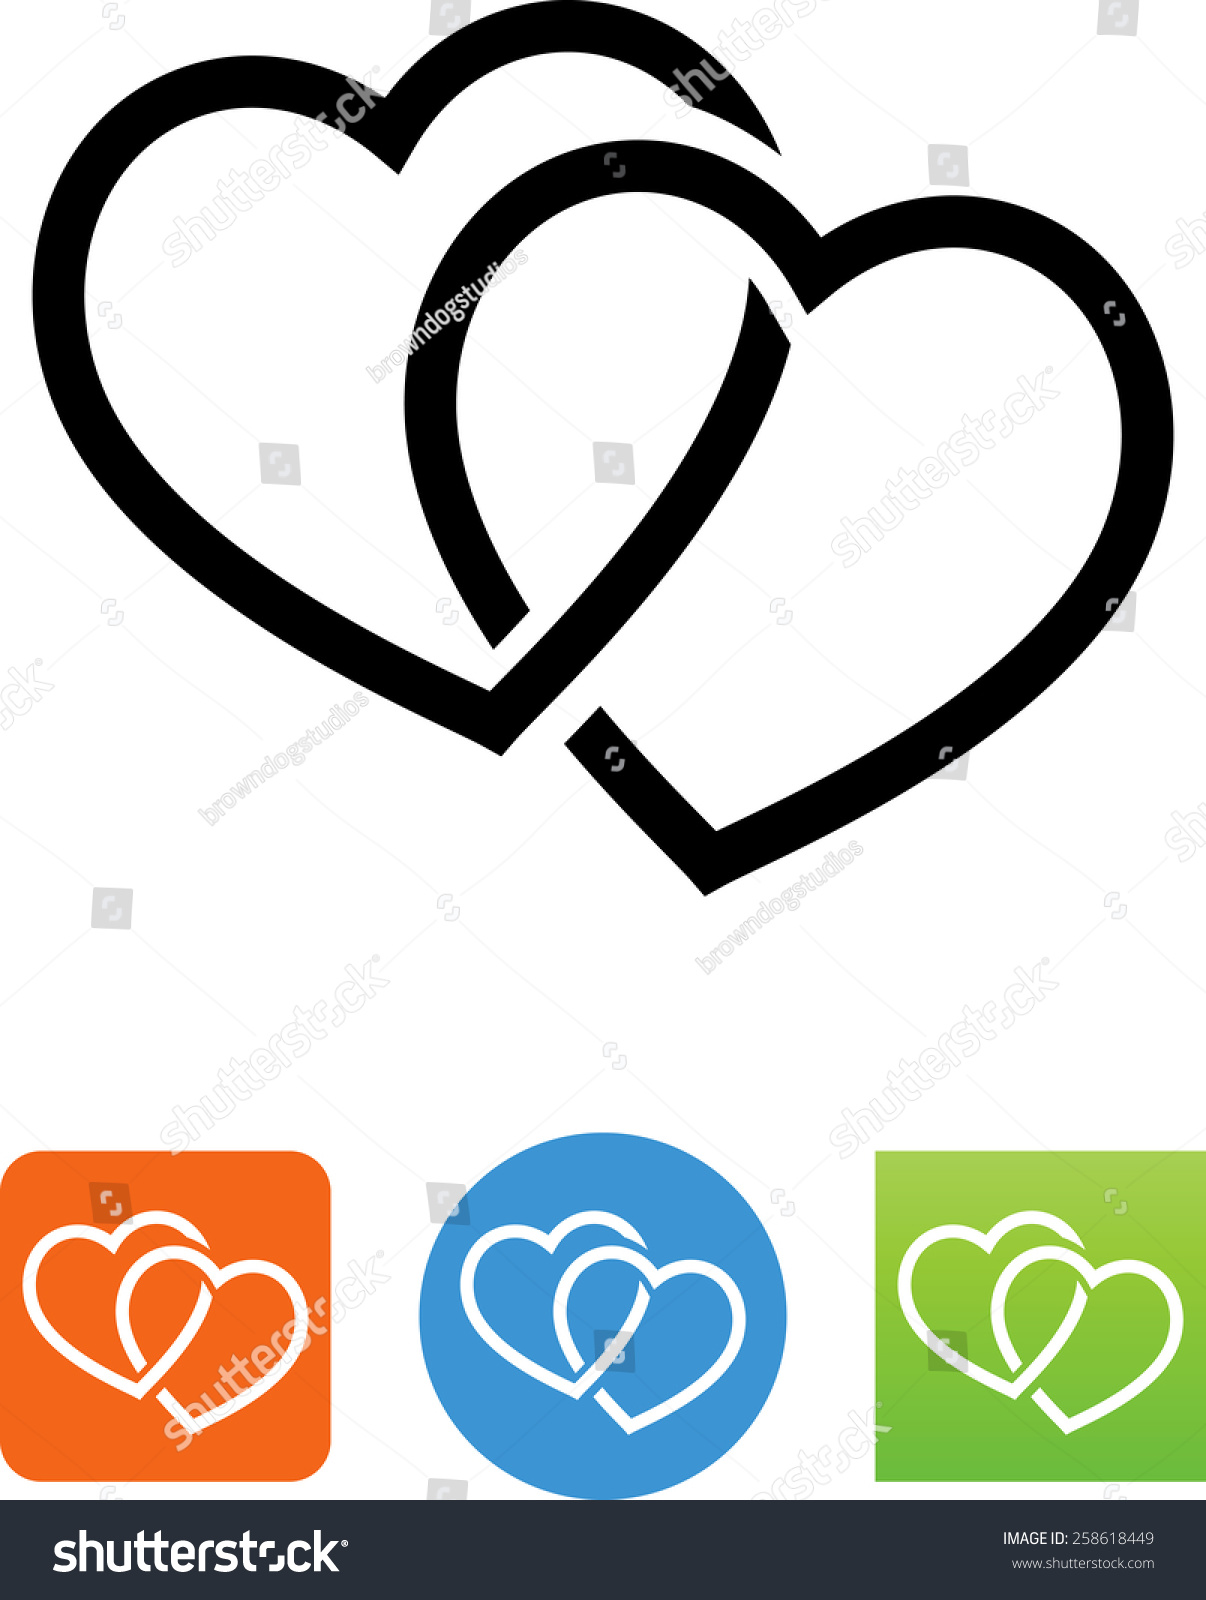 Two Intertwined Hearts Symbol Download Vector Stock Vector 258618449 Shutterstock 